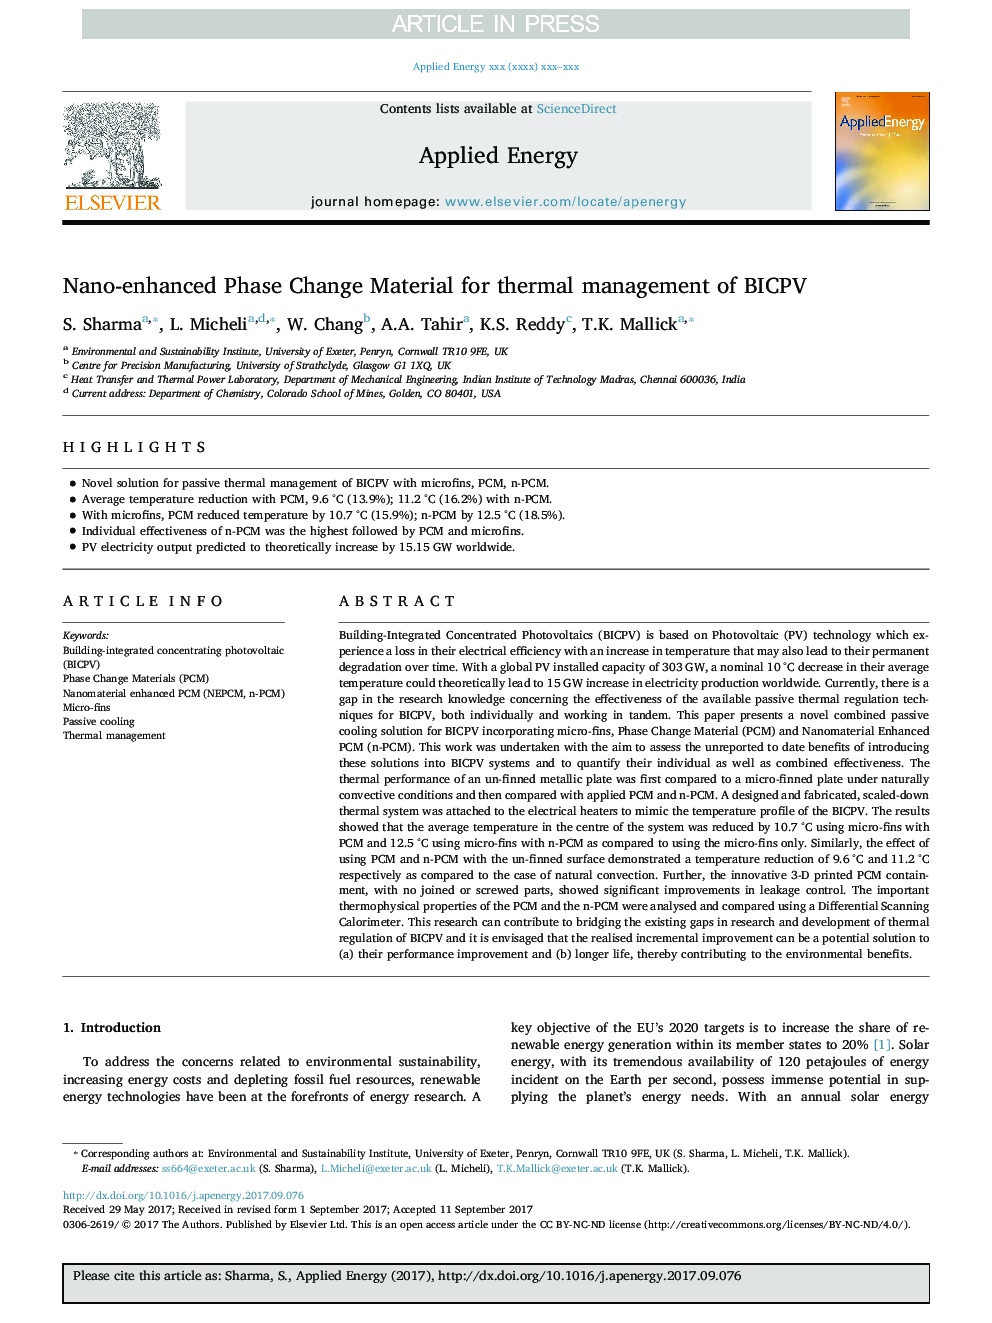 Nano-enhanced Phase Change Material for thermal management of BICPV